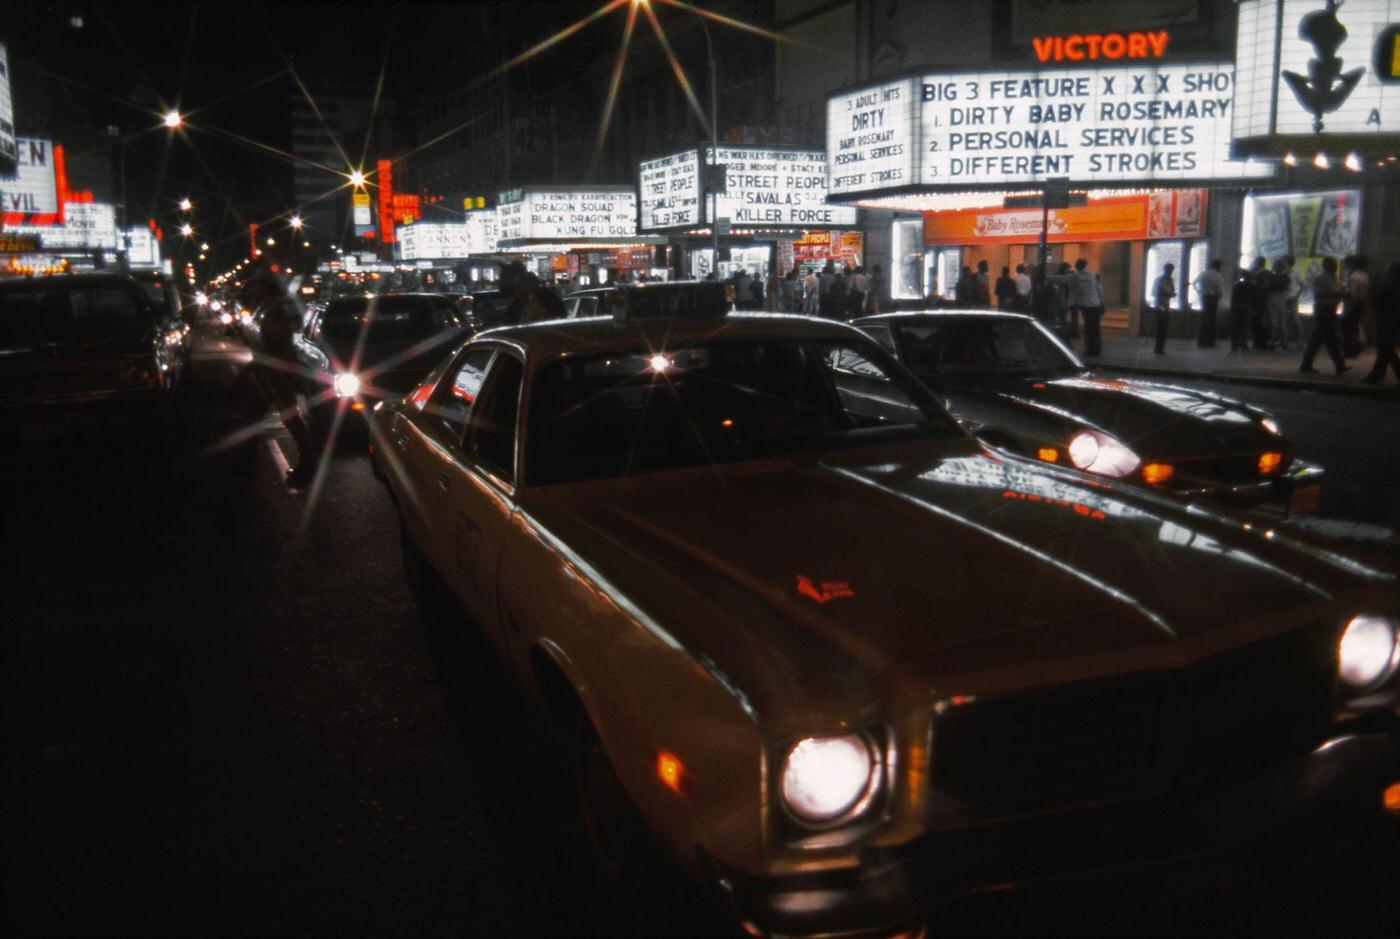 View Of The Marquees Of Cinemas On West 42Nd Street Including The Victory Theatre, The Lyric Theatre, The Times Square Theater And The Apollo Theatre In Manhattan, 1976.